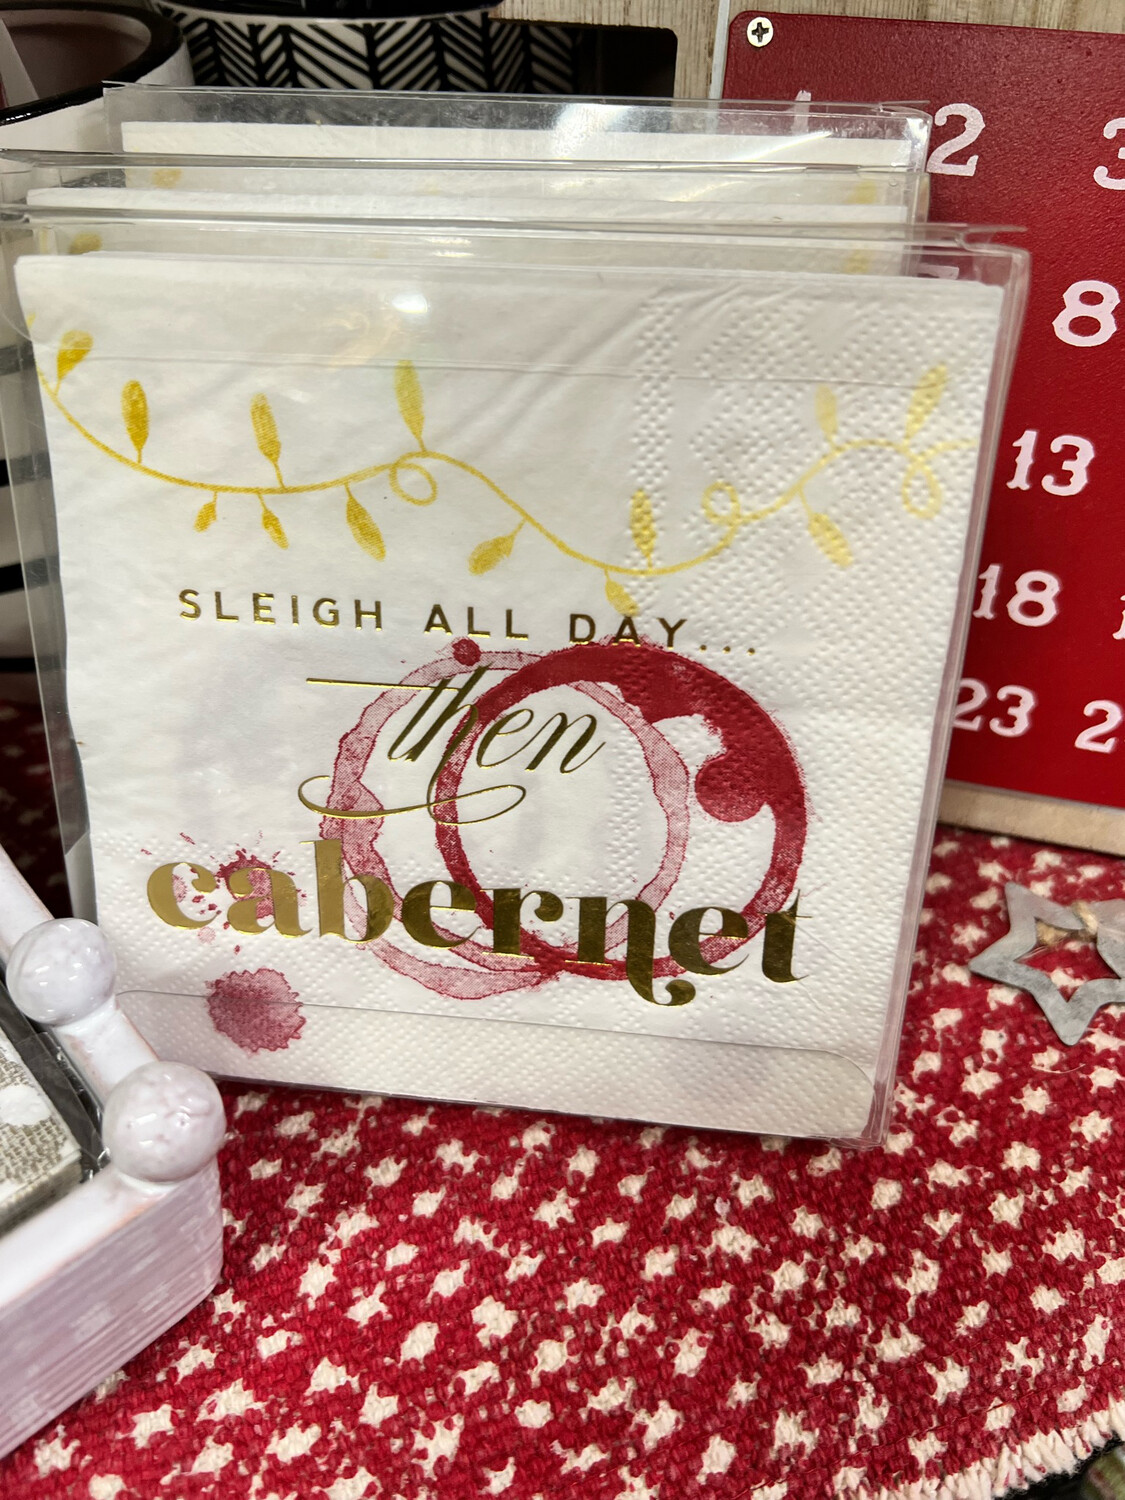 Sleigh All Day, Then Cabernet Cocktail Napkins